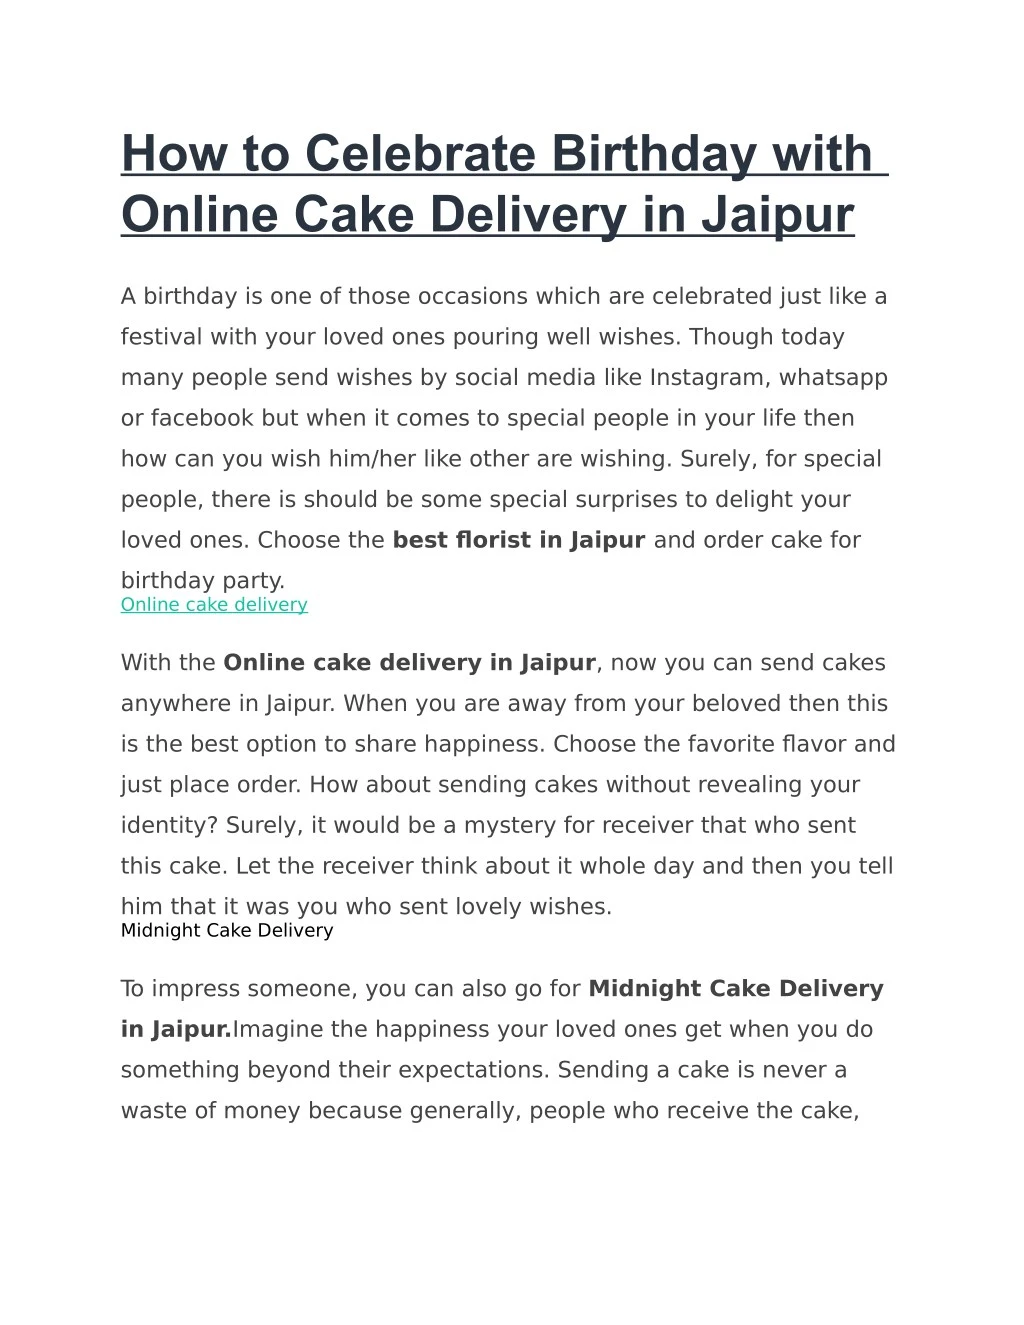 how to celebrate birthday with online cake